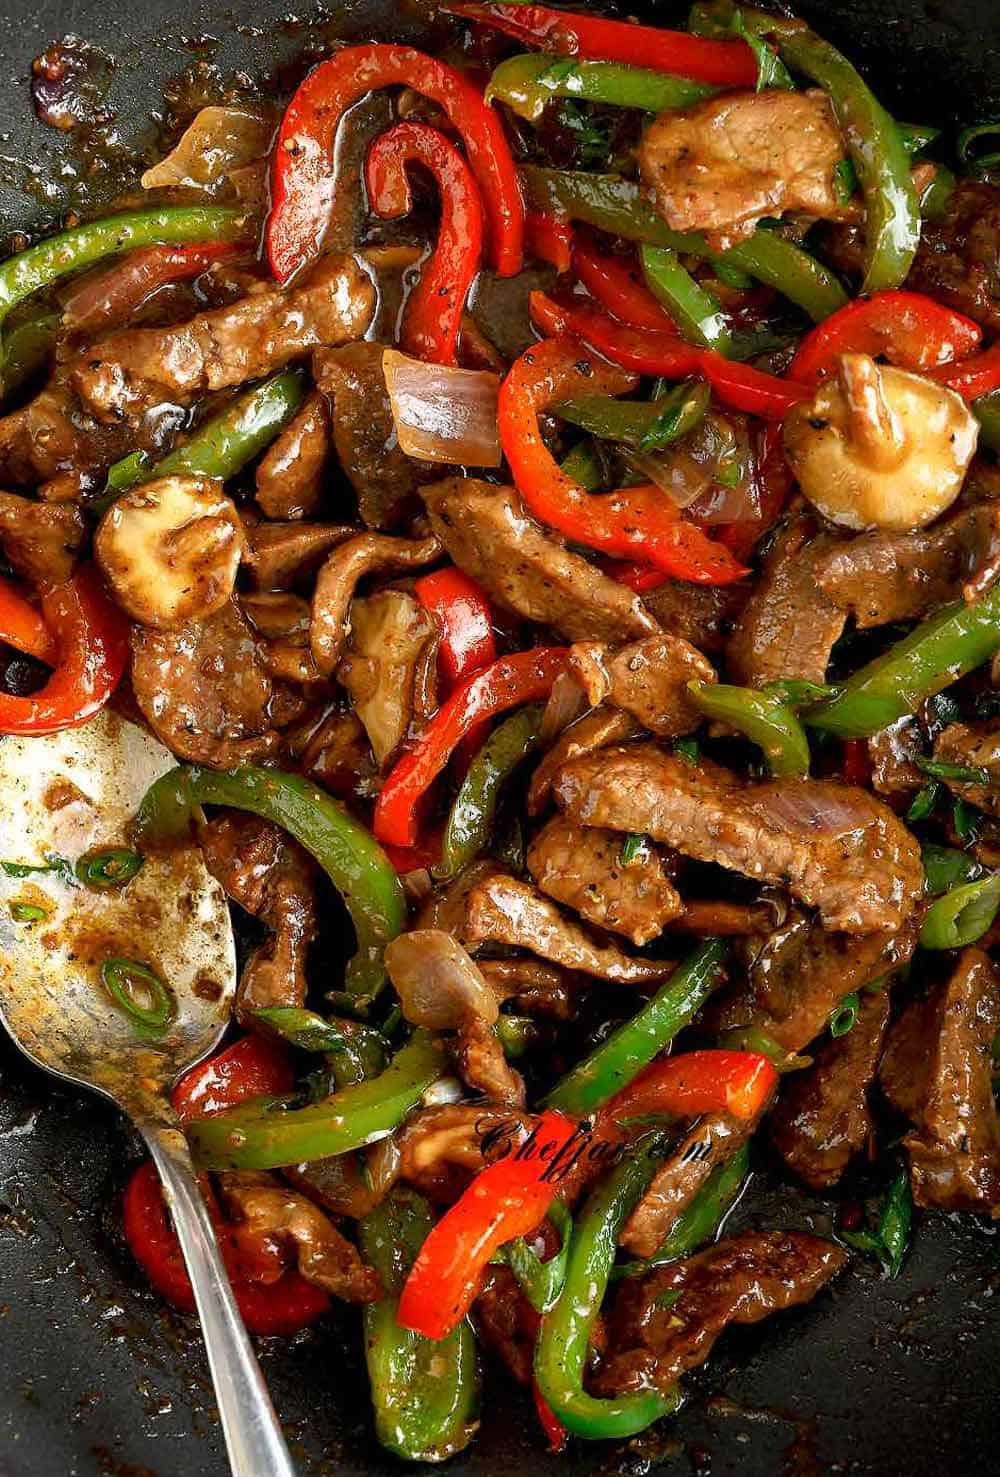 Tender and succulent beef strips with homemade black pepper flavoured sauce, Chinese black pepper beef stir-fry can be made in 30 minutes